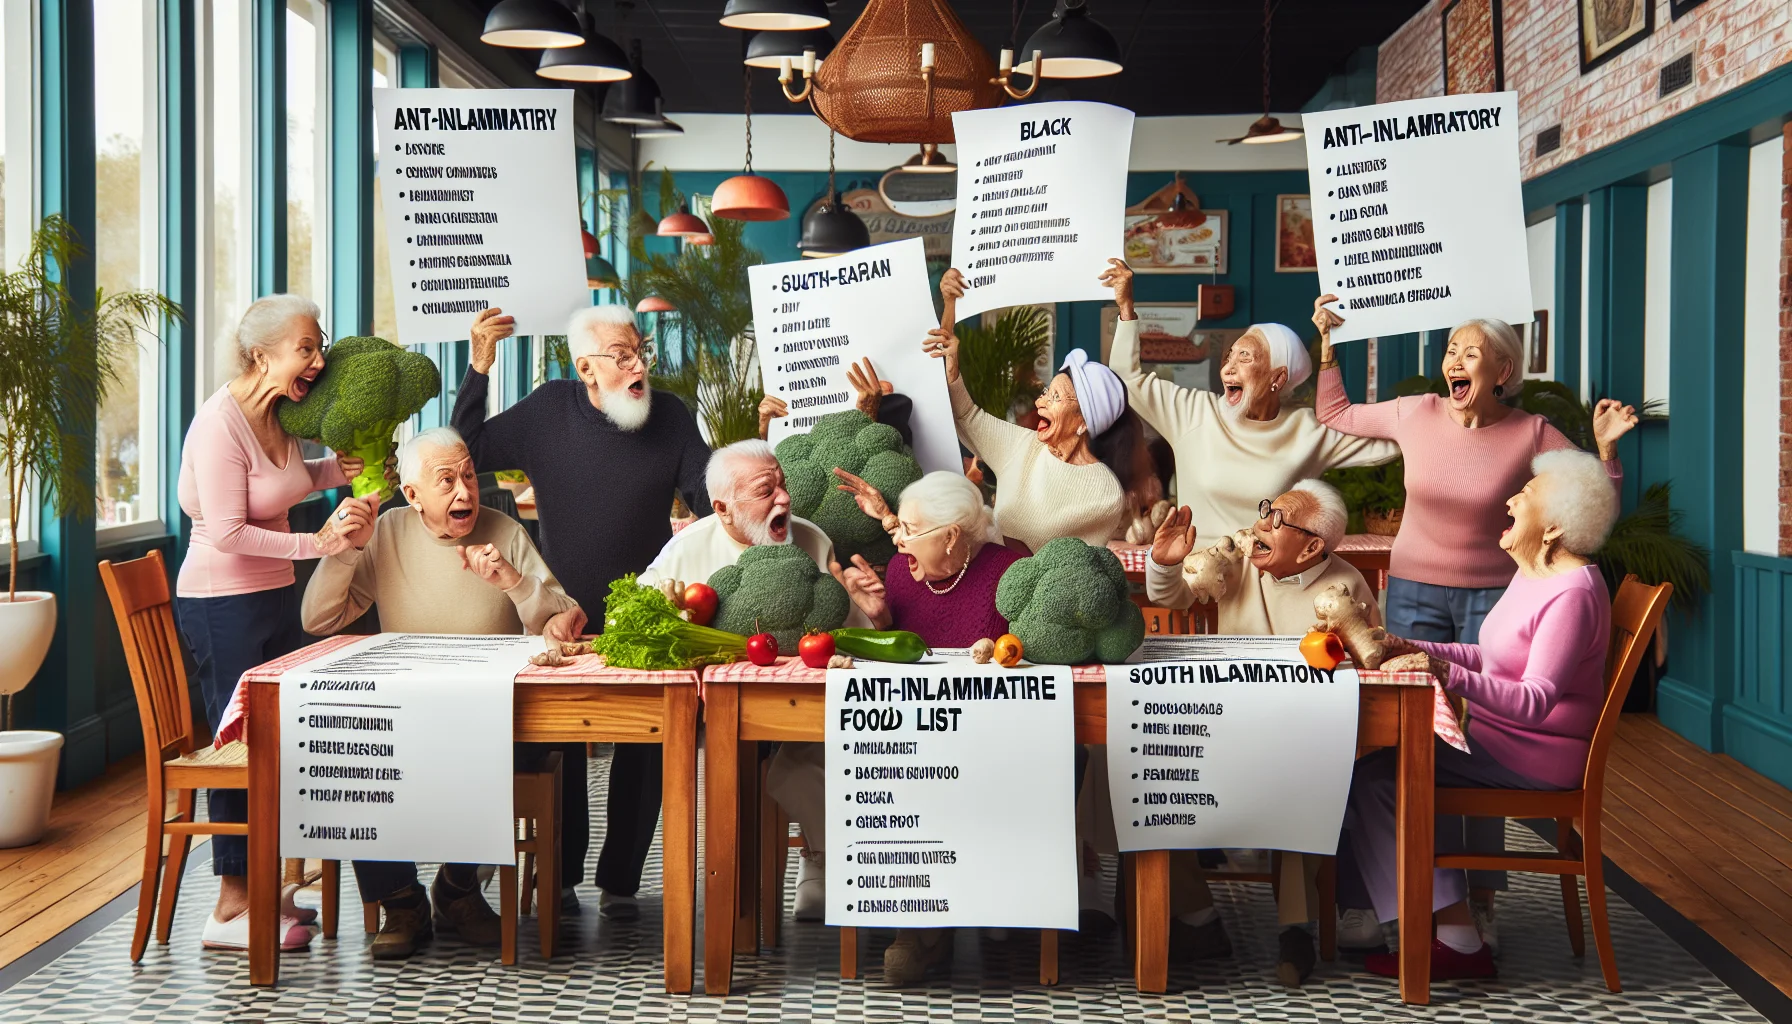 Imagine a humorous scene set in a vibrant senior citizens gathering area. There are elderly individuals of different descents, say Caucasian, Black, Hispanic, and South Asian, each holding large printouts of anti-inflammatory food lists. The lists are humorously oversized, almost like restaurant menus. The elders are enthusiastically discussing their dietary plans, pointing at food items on their lists and joking around. Some are playfully fighting over bunches of broccoli. One elderly woman, a Caucasian, is trying to convince a Middle-Eastern man to eat an avocado, only to find him stubbornly reaching for a giant ginger root, while an Asian woman is laughing hysterically at this situation.